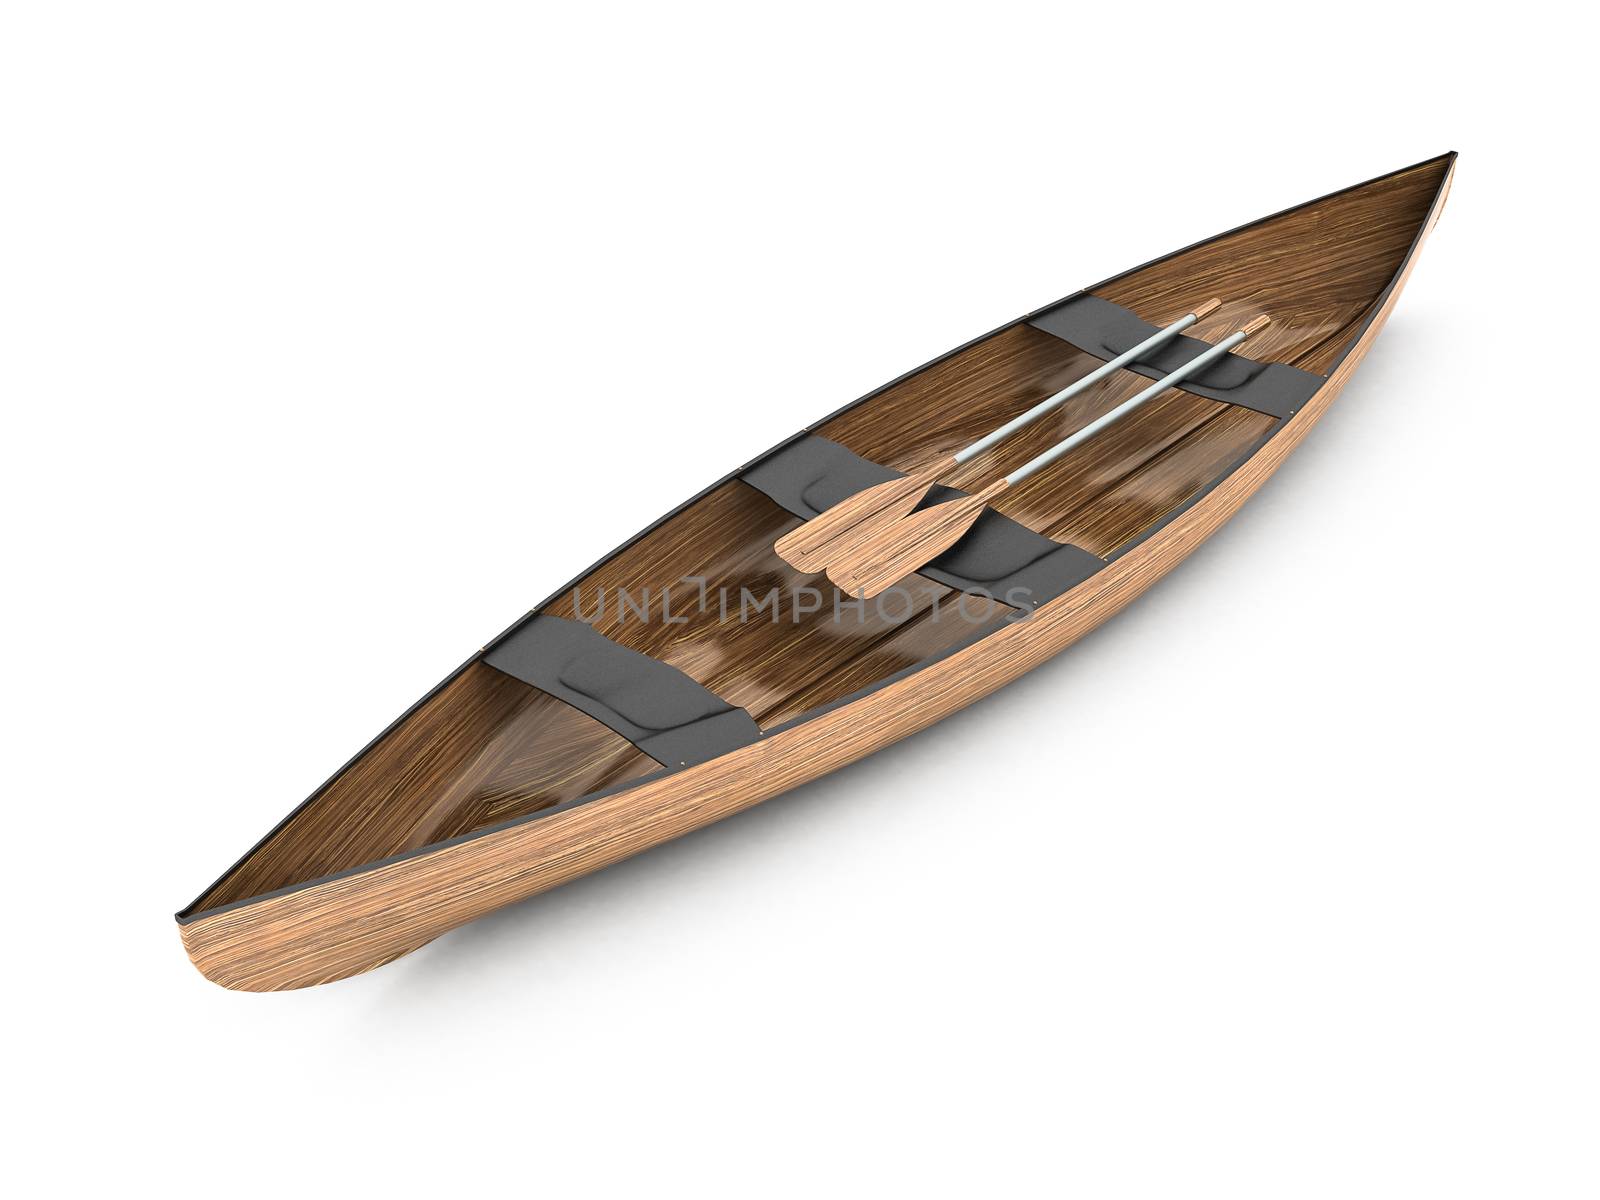 Wooden boat canoe isolated on a white background